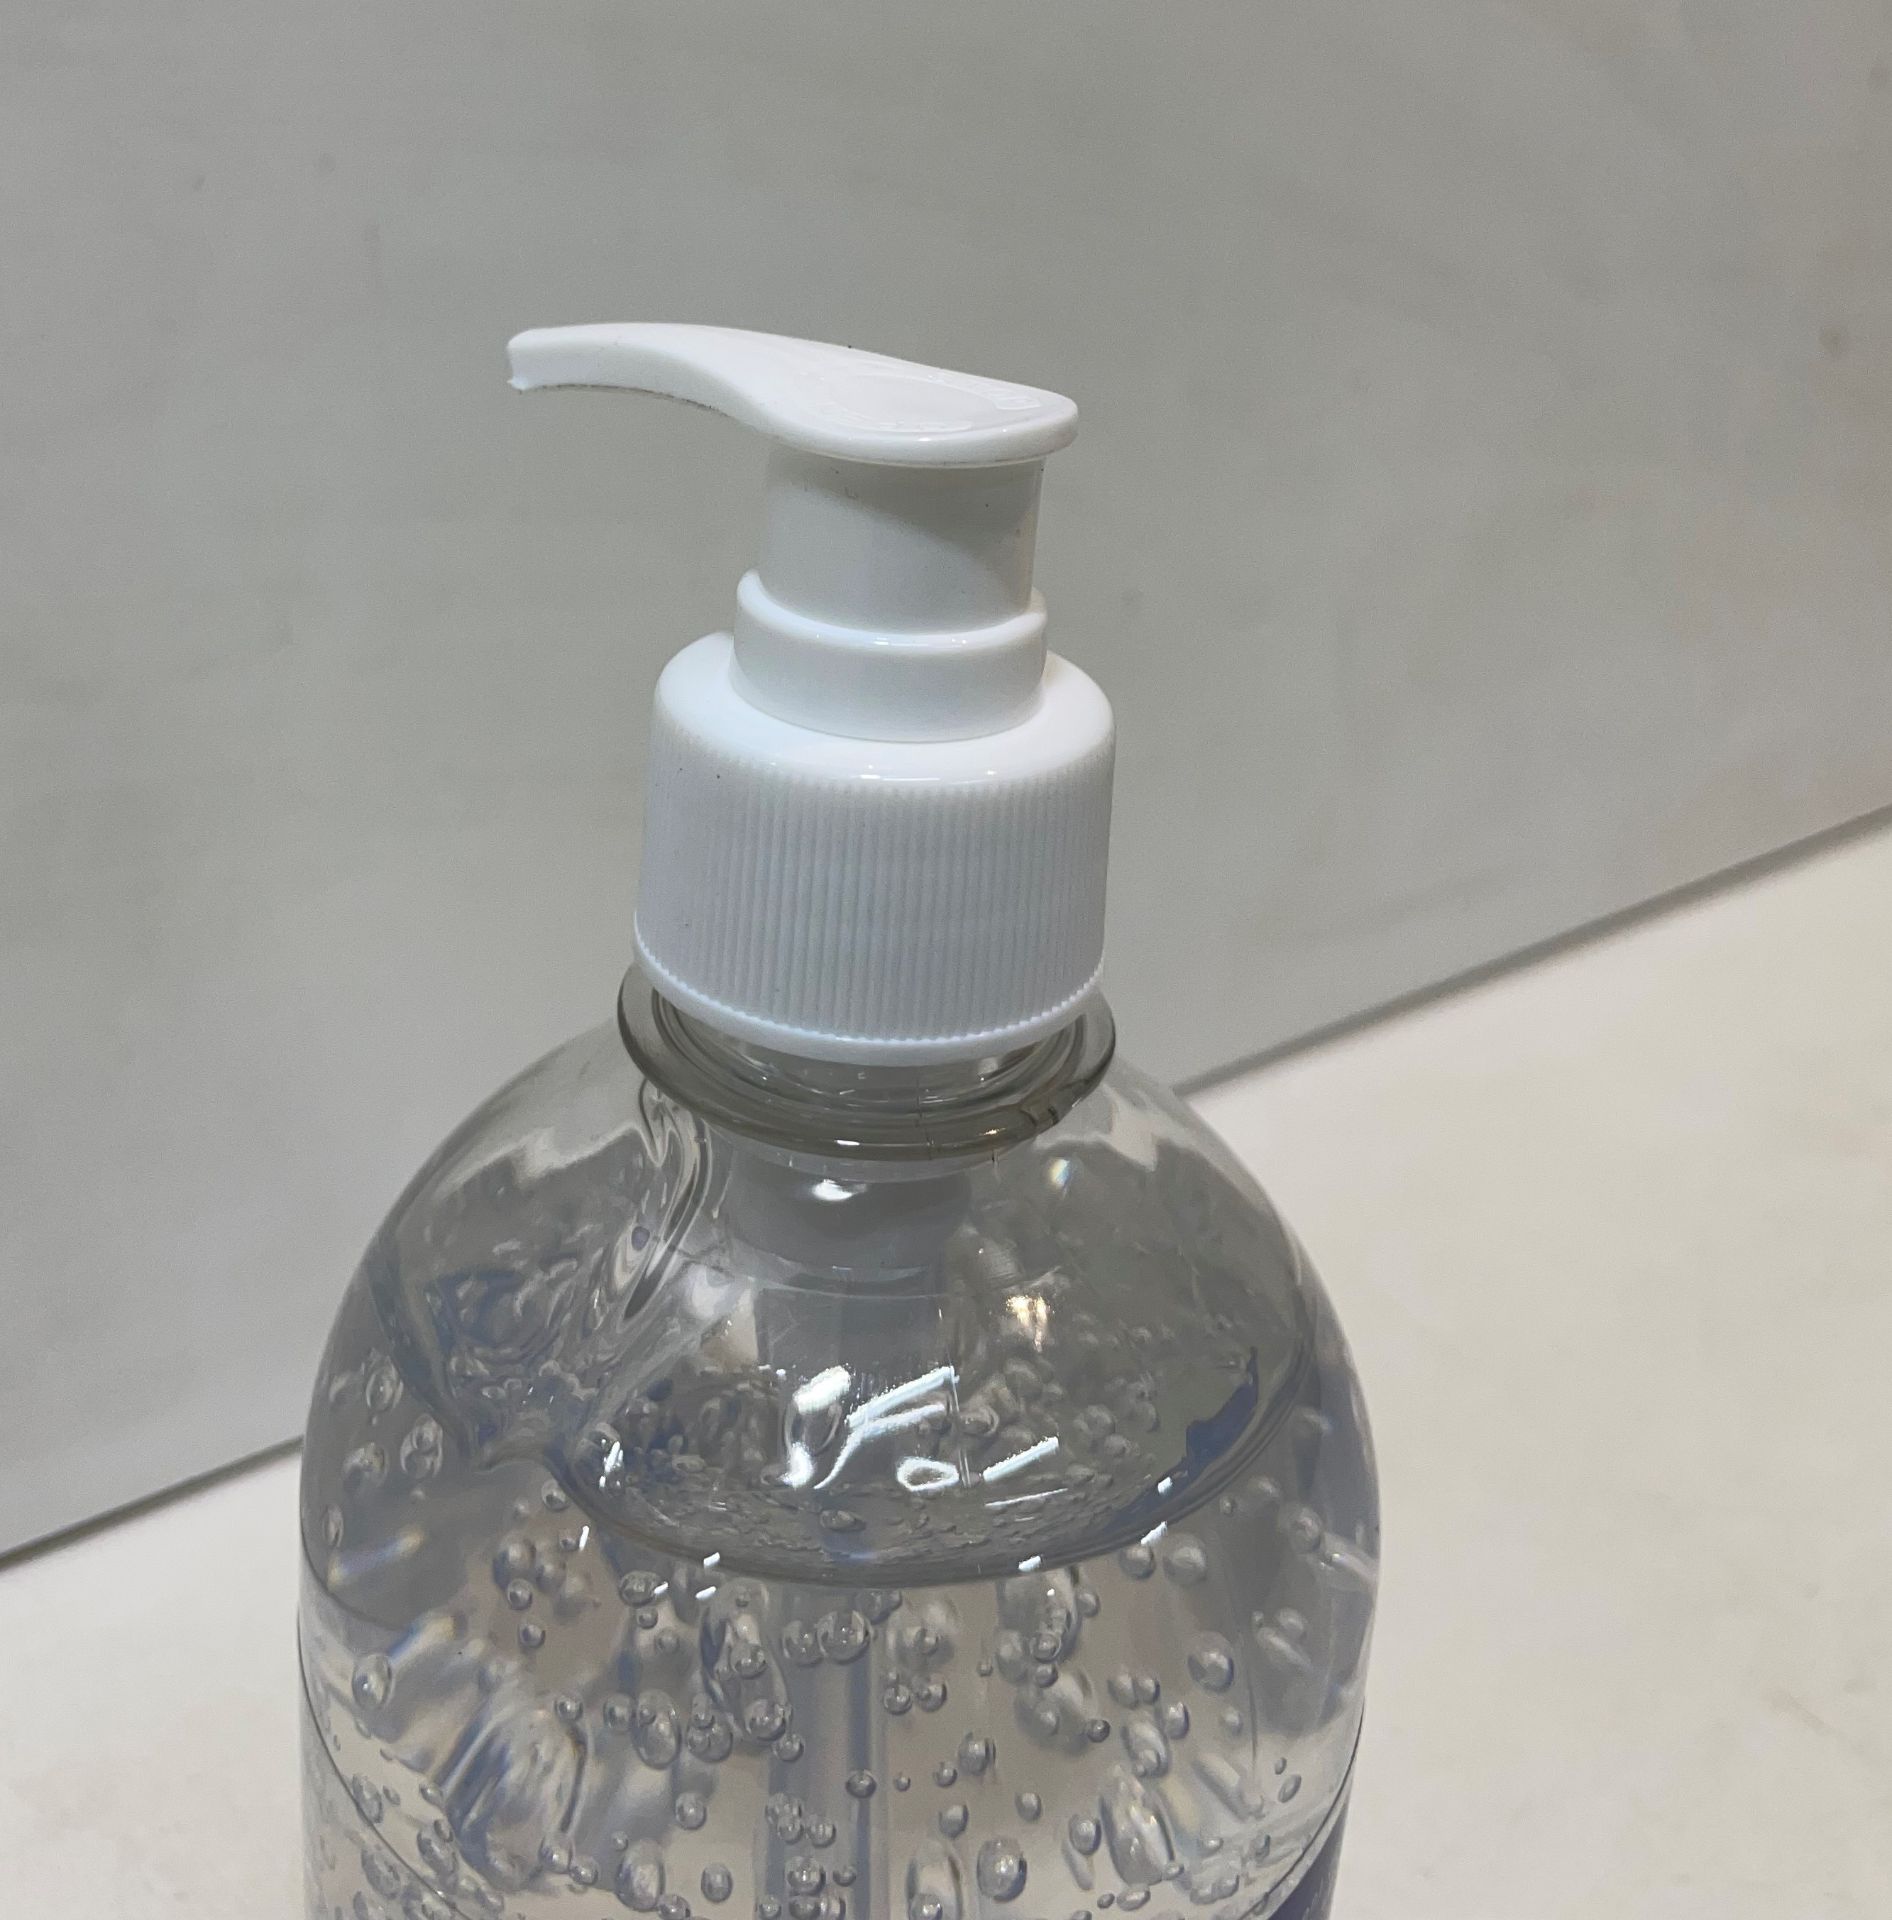 Approximately 1440 500ml Instant Hand Sanitizer Gel |****Instructions are FRENCH**** - Image 9 of 10